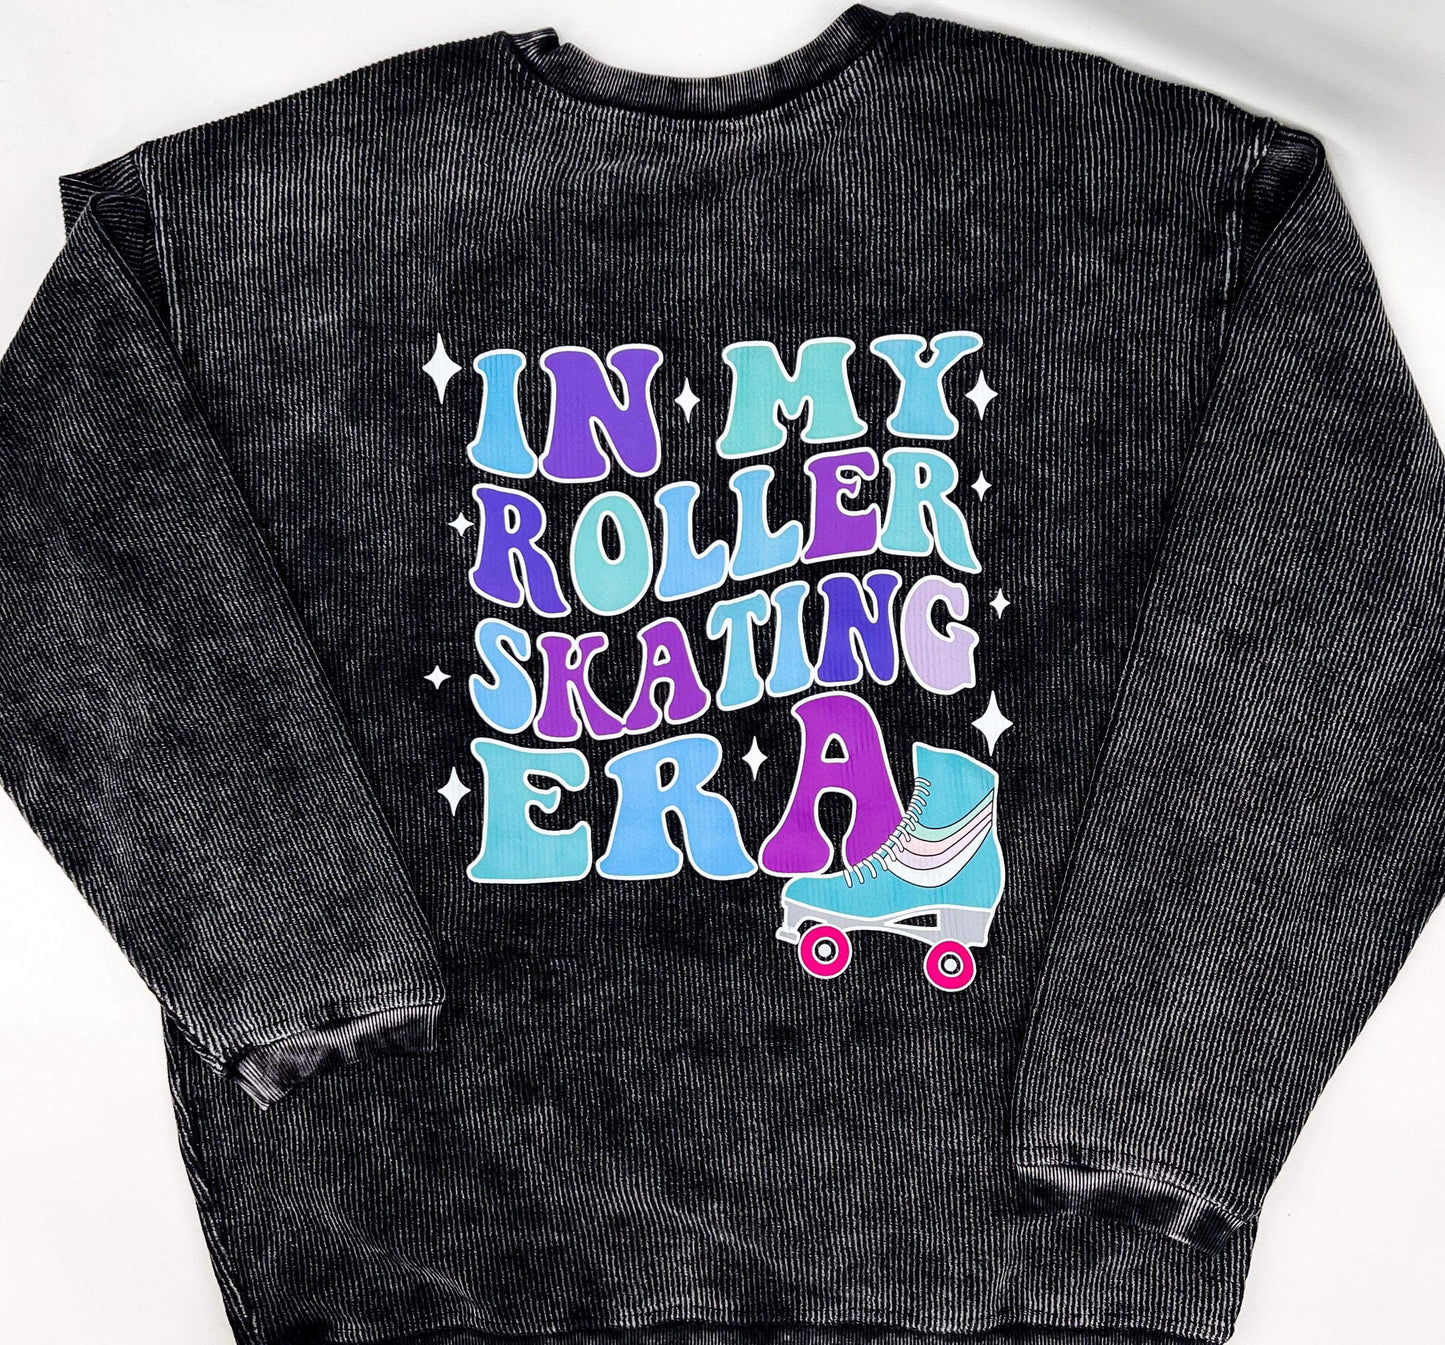 In My Roller Skating Era, YOUTH